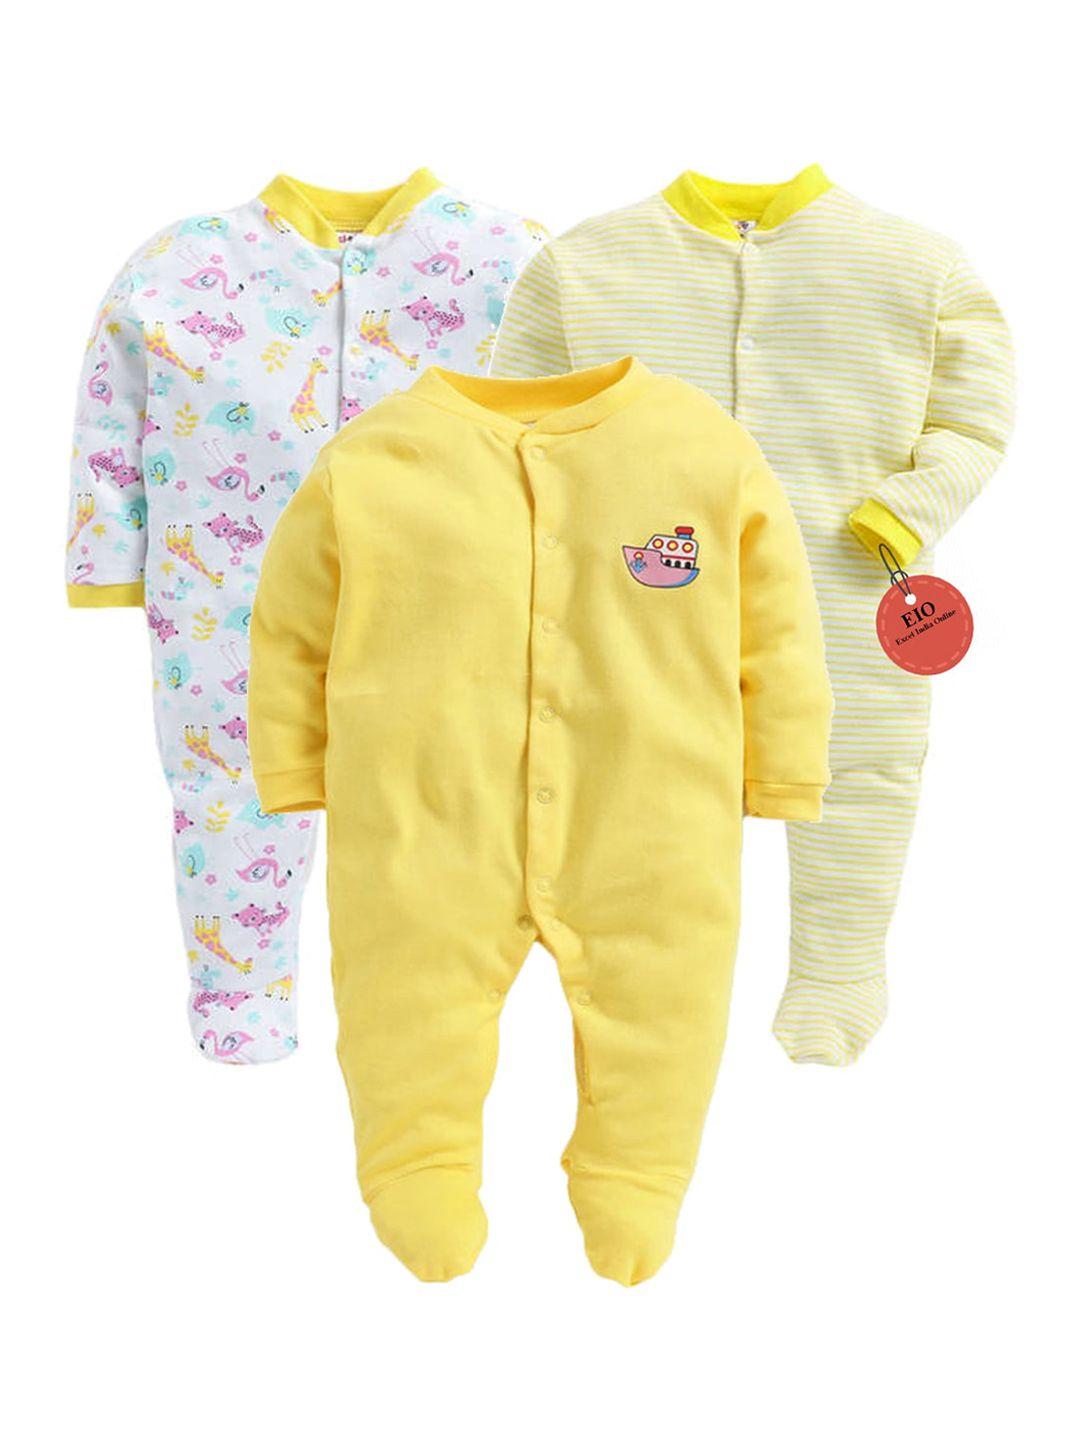 eio-unisex-infant-pack-of-3-printed-cotton-rompers